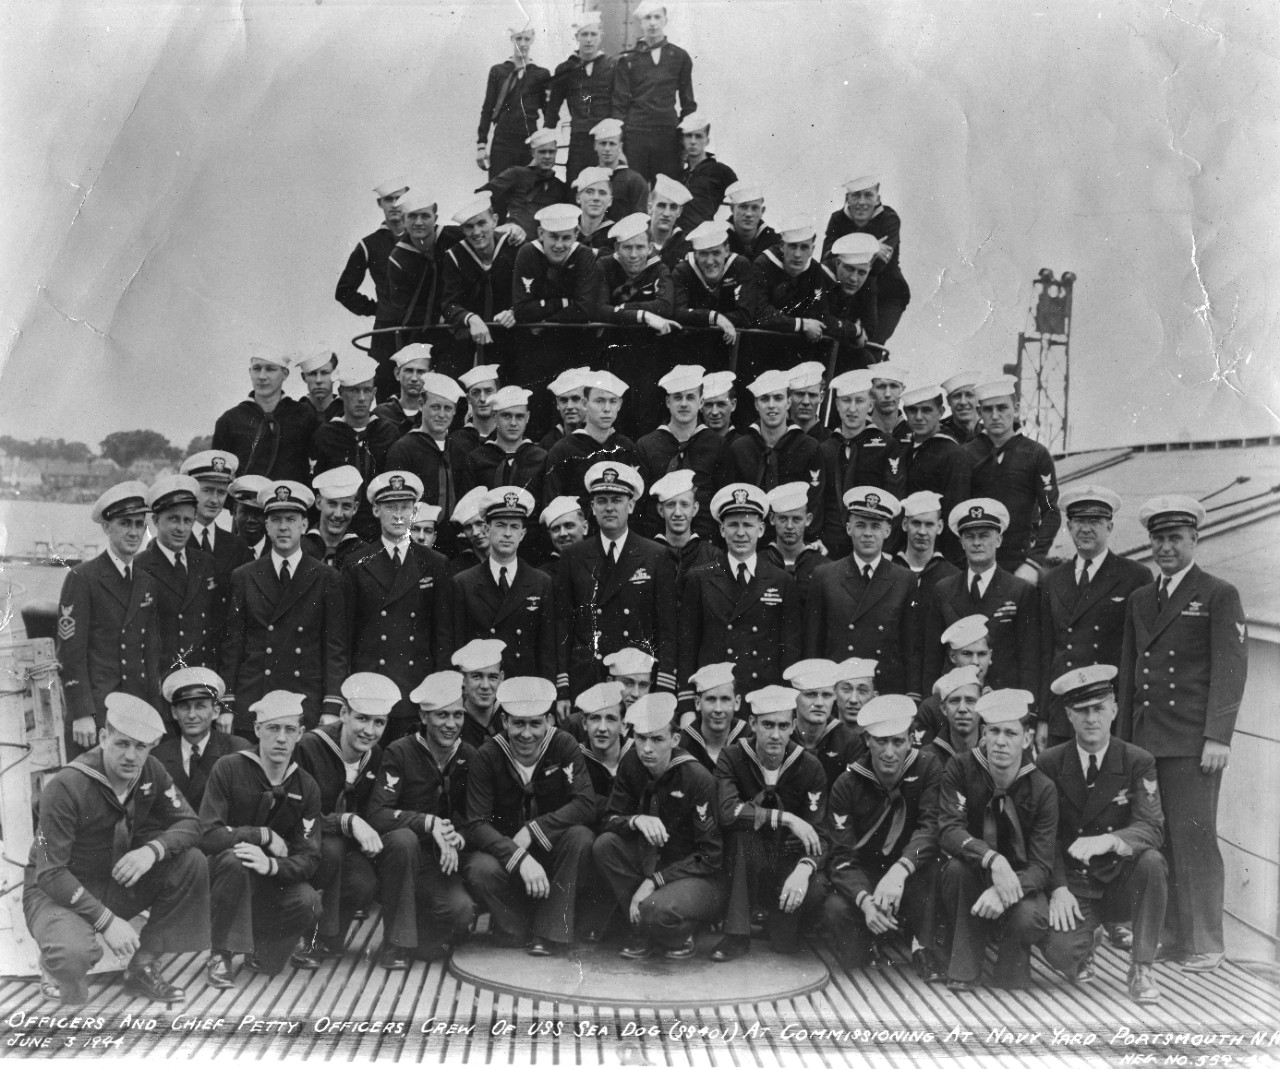 19 black and white photos from the service of Francis Philip Goodwin during World War II, donated by his family. Focus is U.S. Navy submarines and submarine life. Shown are the launching of USS Sea Dog (SS-401) as well as her commissioning crew and a party celebrating the event. Launching photo is alternately labeled USS Segundo (SS-398), leading to some confusion on identification. Photos of sailors on deck of USS Pilotfish (SS-386) alongside USS Proteus (AS-19) at Yokusuka. Deck guns can be seen, as well as the boat’s dog mascot.